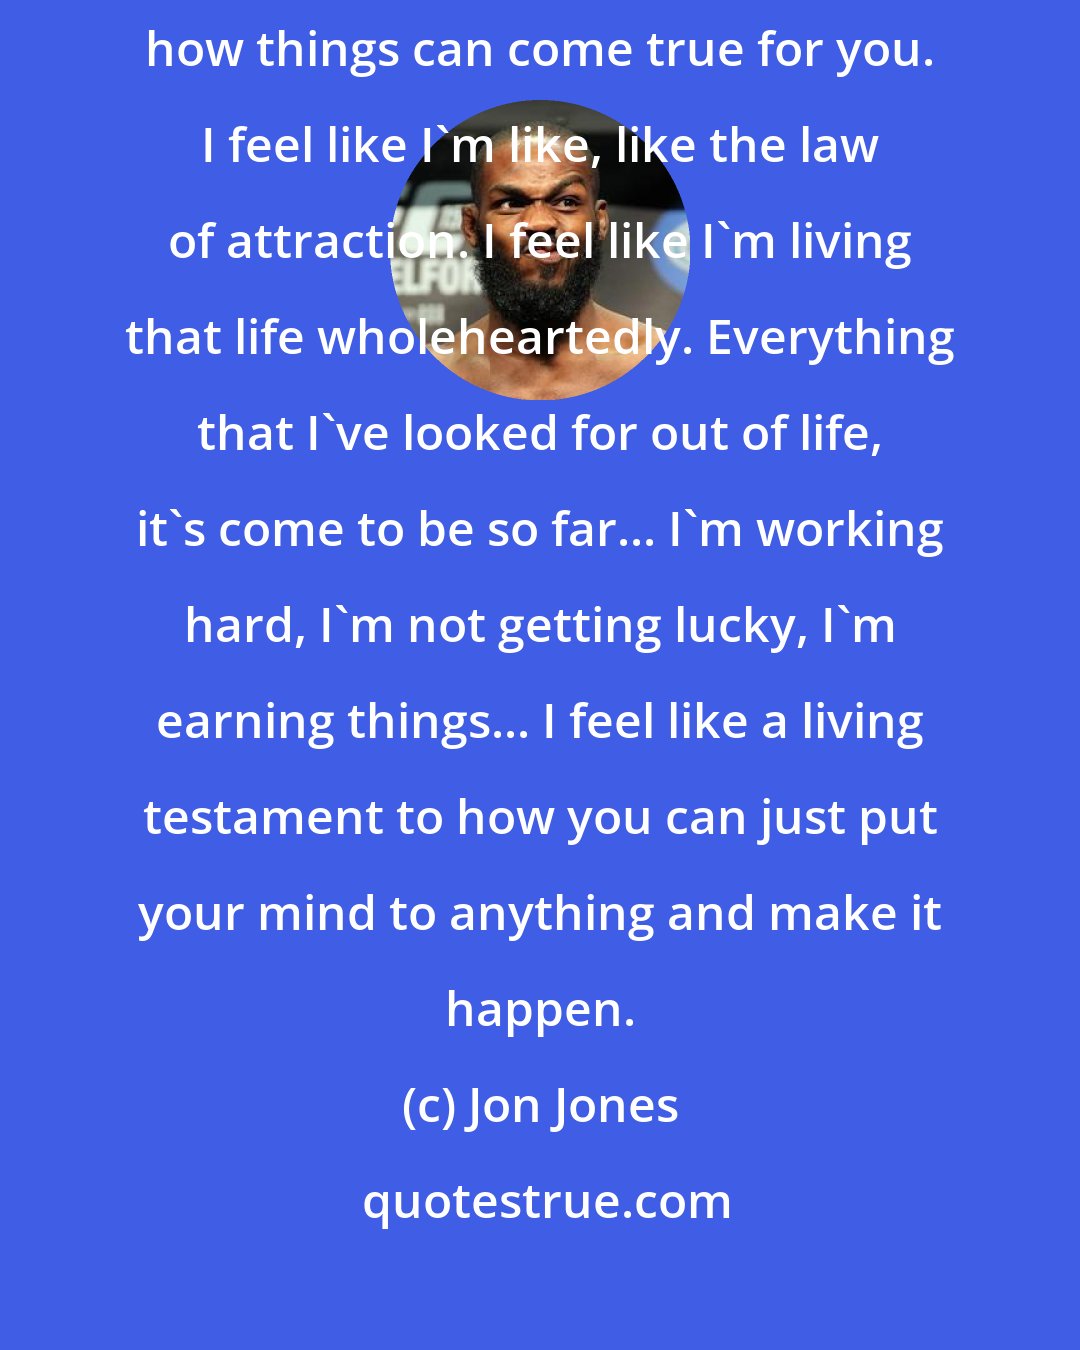 Jon Jones: I really feel like a walking testimony of like if you set your mind to things, how things can come true for you. I feel like I'm like, like the law of attraction. I feel like I'm living that life wholeheartedly. Everything that I've looked for out of life, it's come to be so far... I'm working hard, I'm not getting lucky, I'm earning things... I feel like a living testament to how you can just put your mind to anything and make it happen.